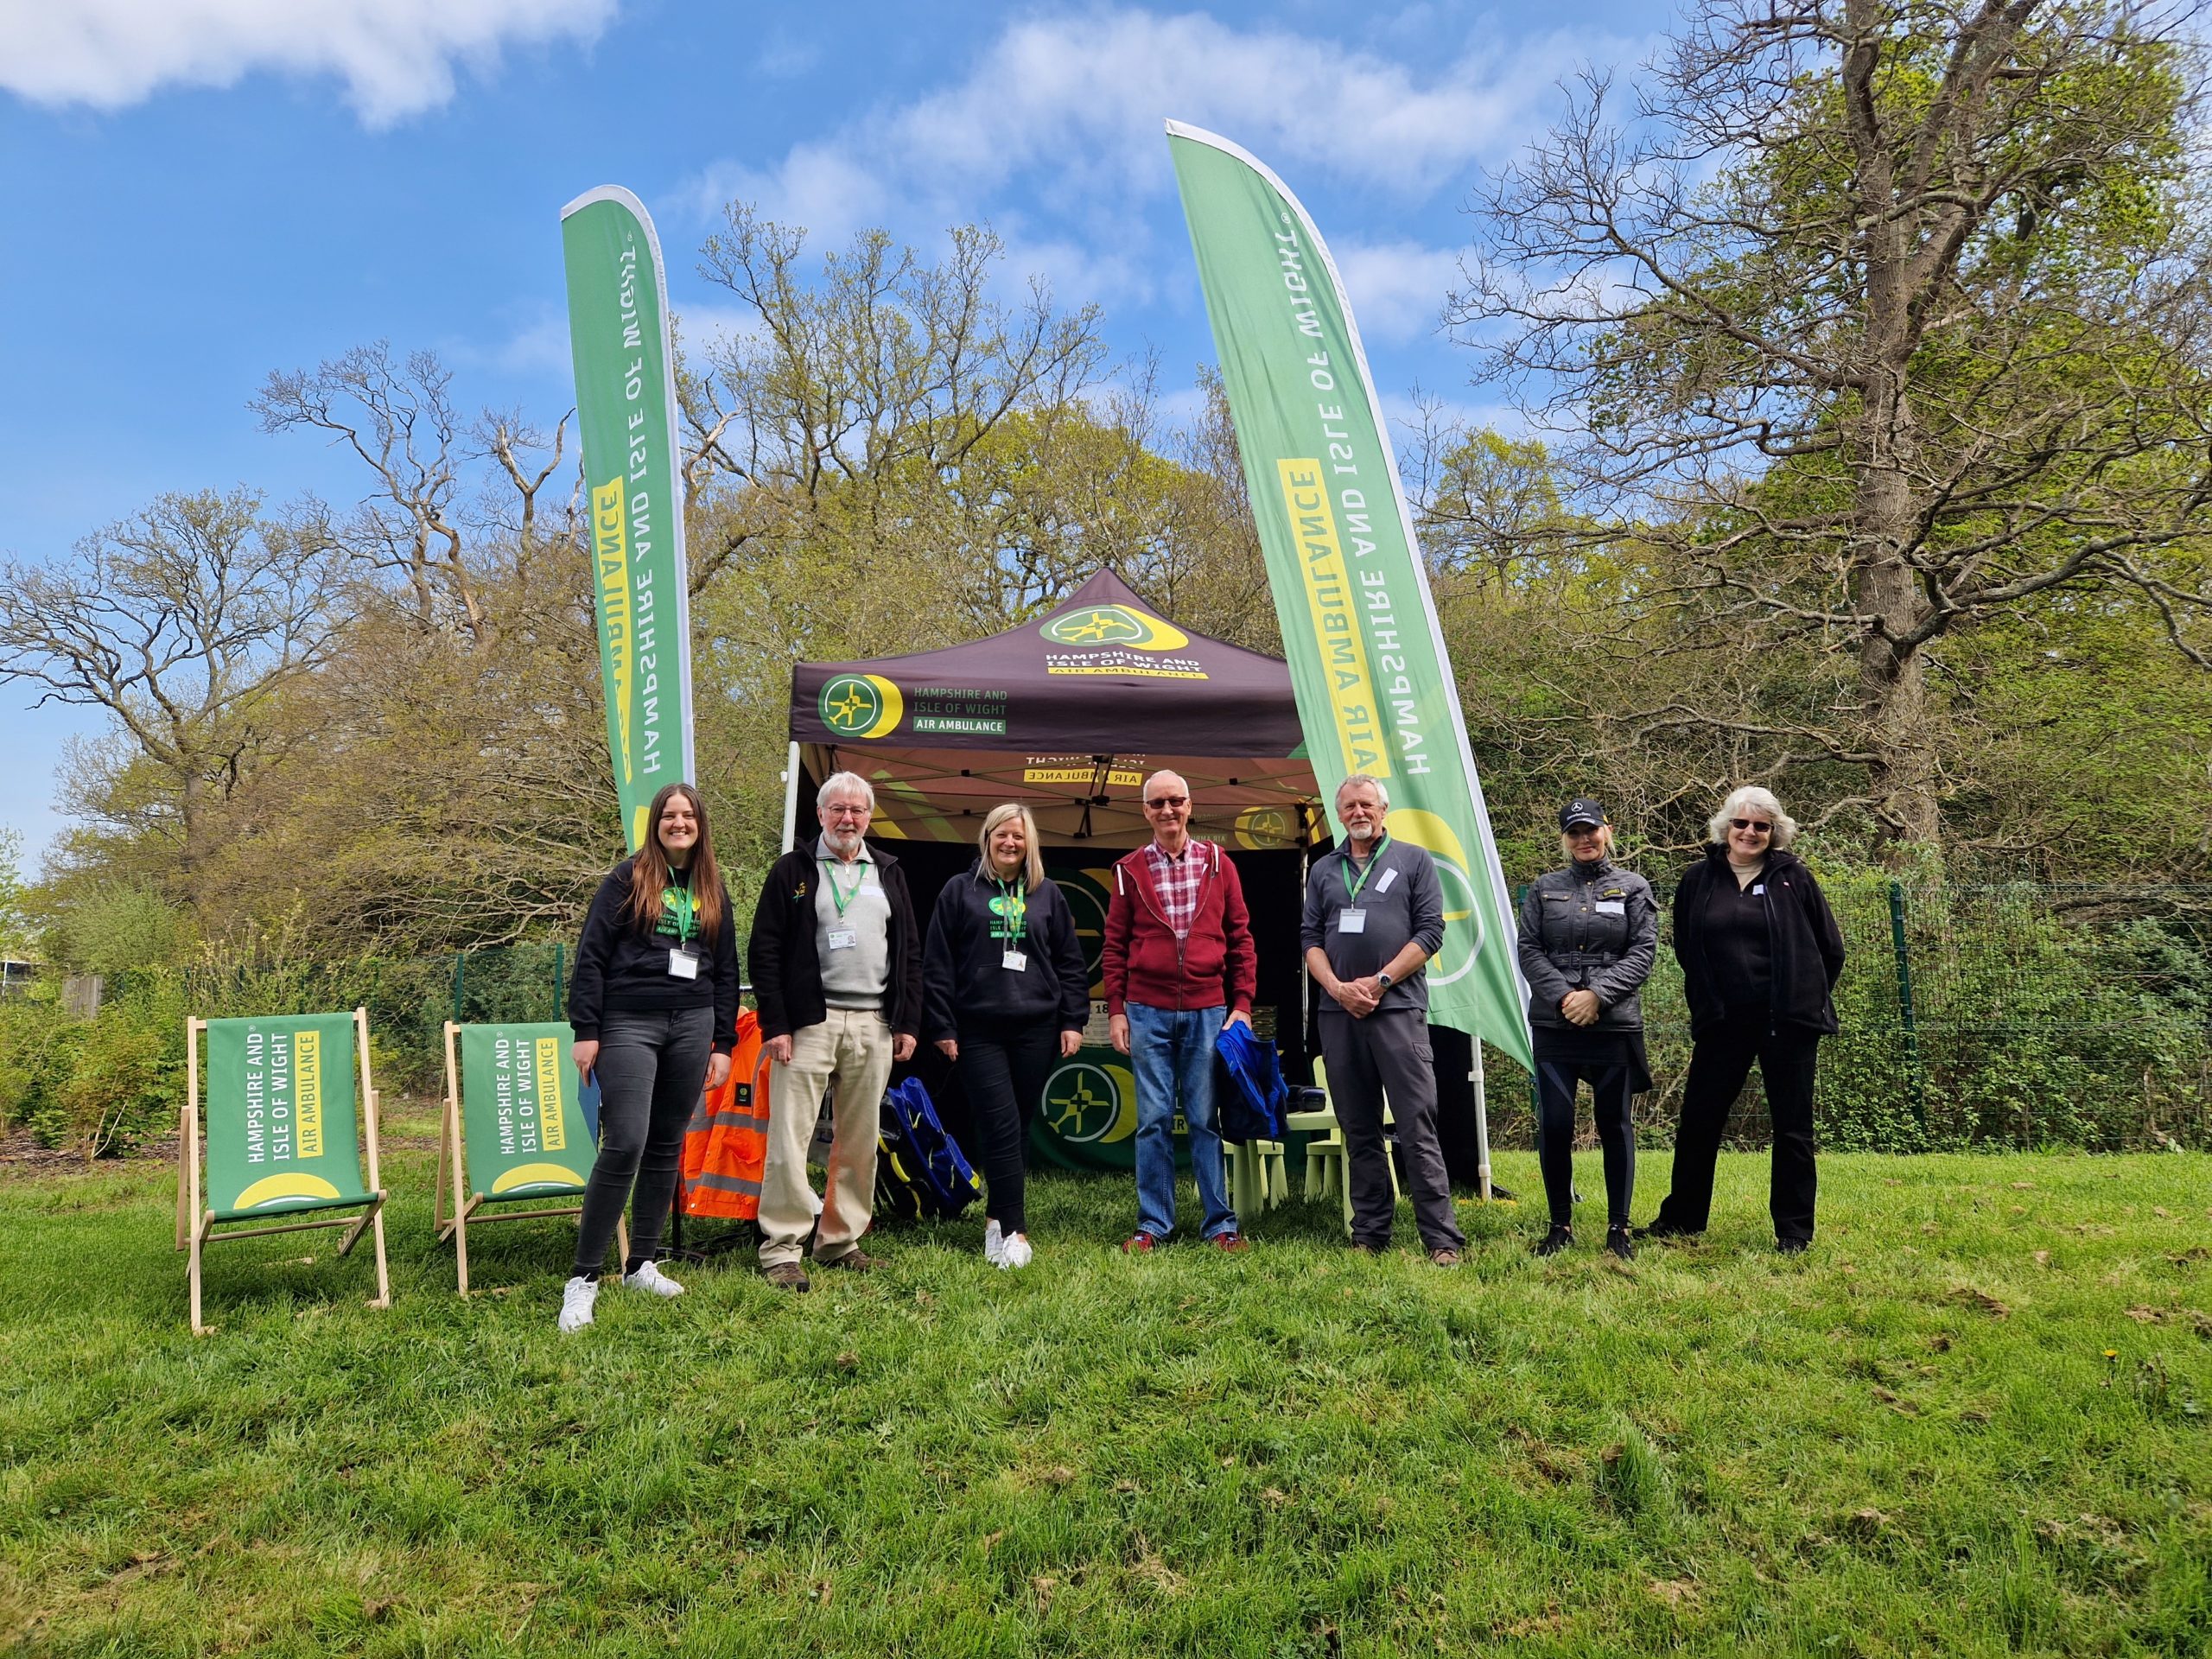 A group of people standing in a field in front of HIOWAA branded flags and gazebo.